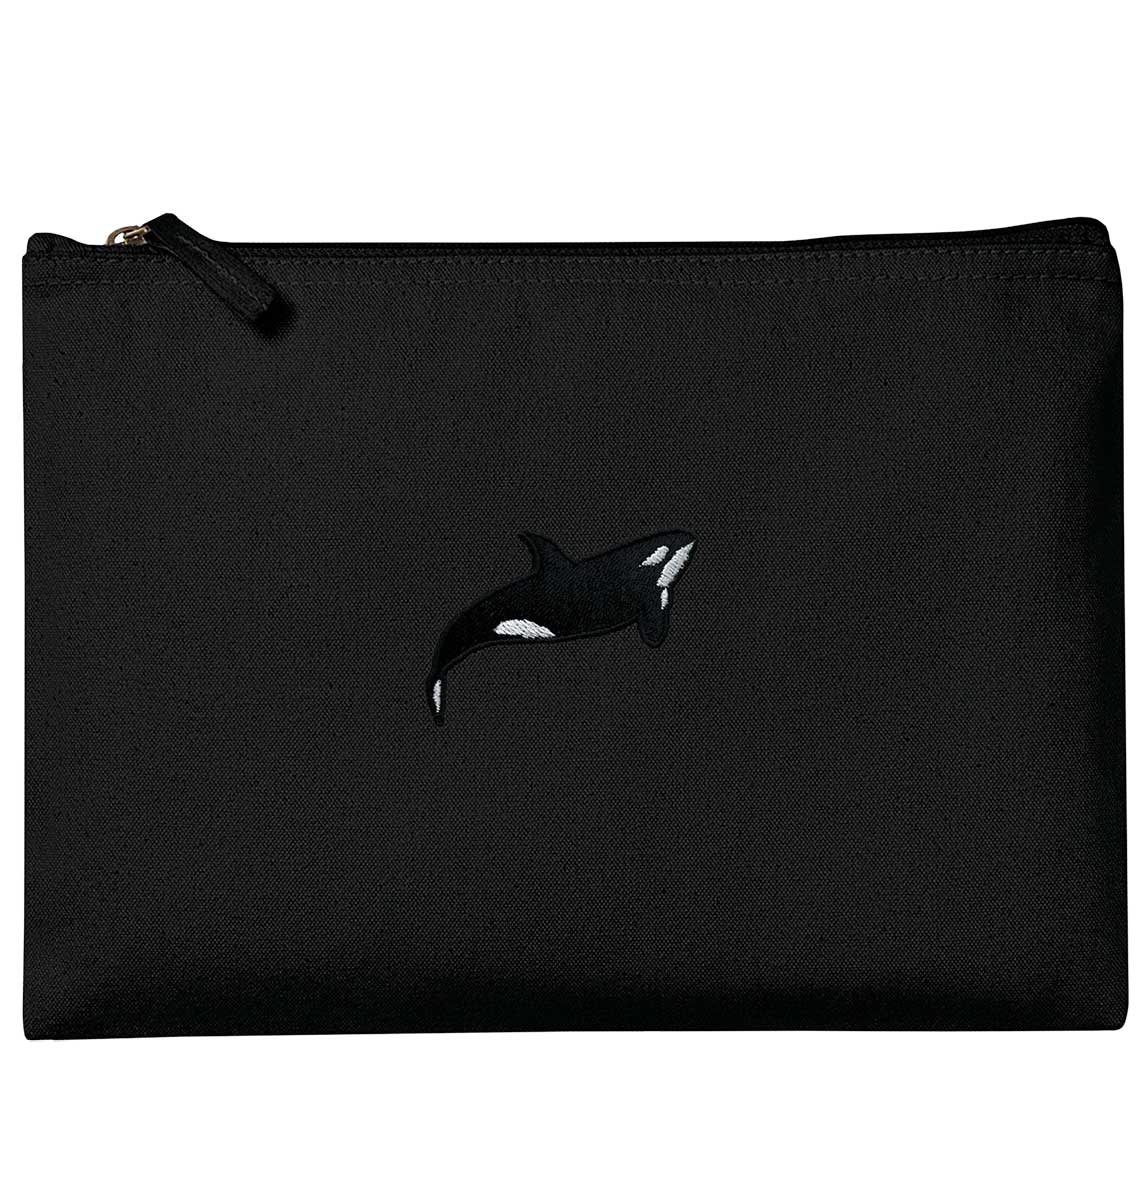 Orca Whale Embroidered pouch - Organic Accessory Bag - Sea Life